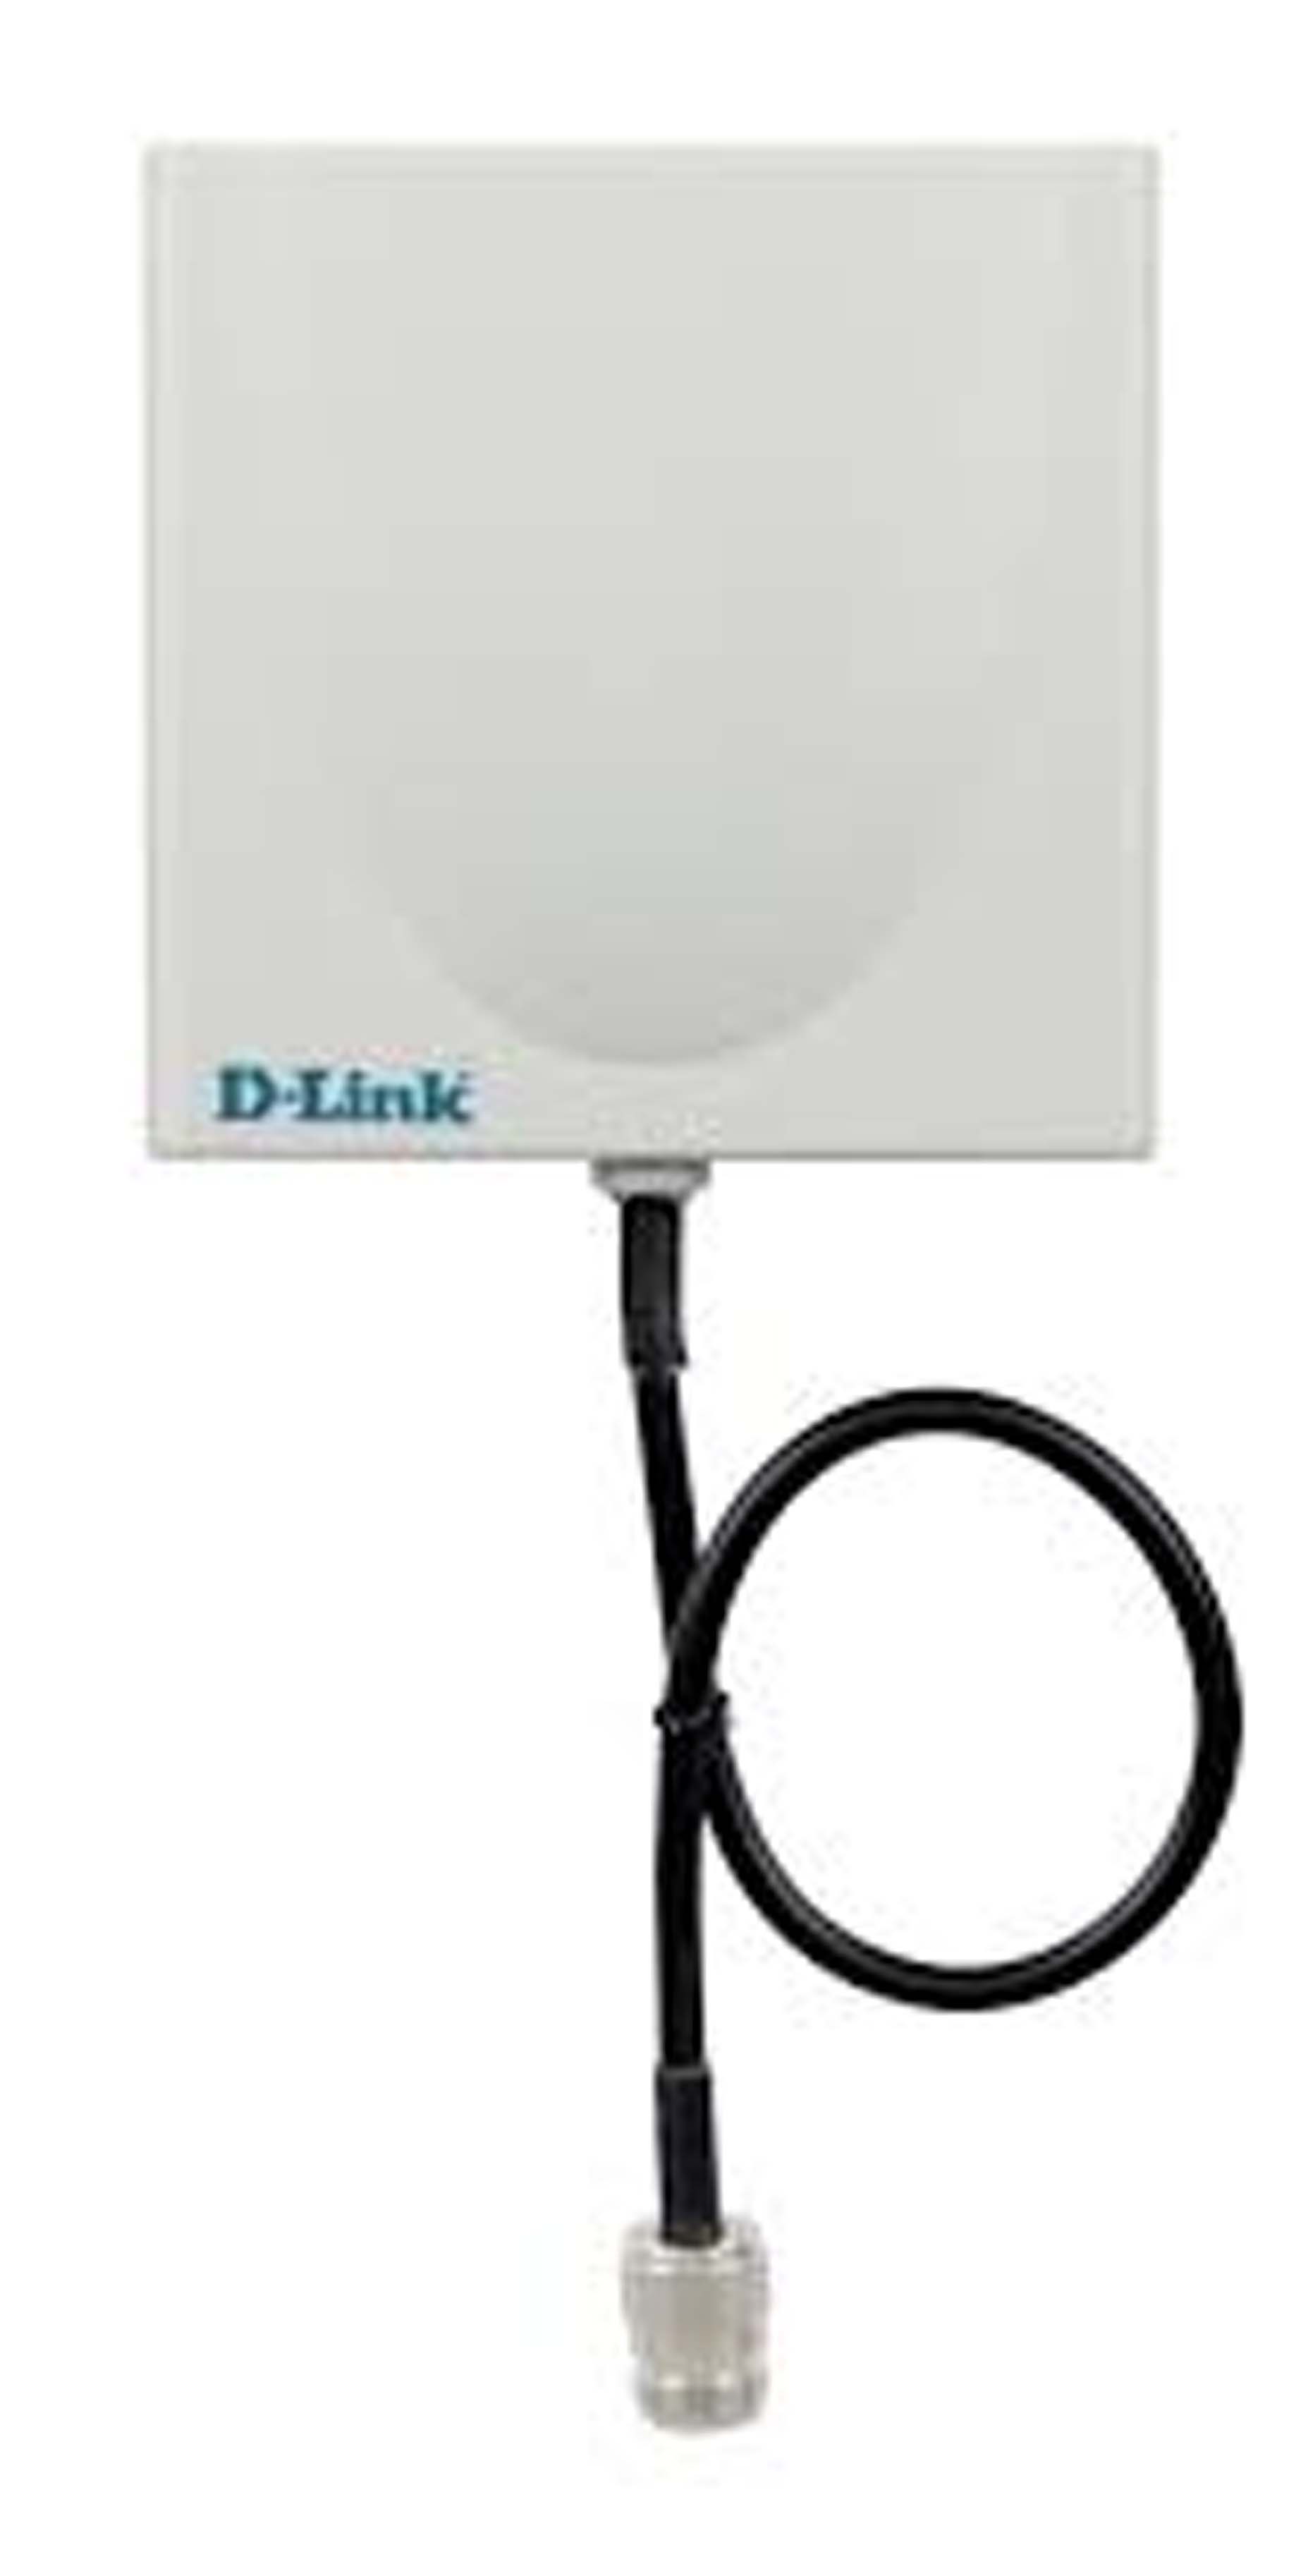 harga-d-link-ant70-1000-dualband-24ghz-5